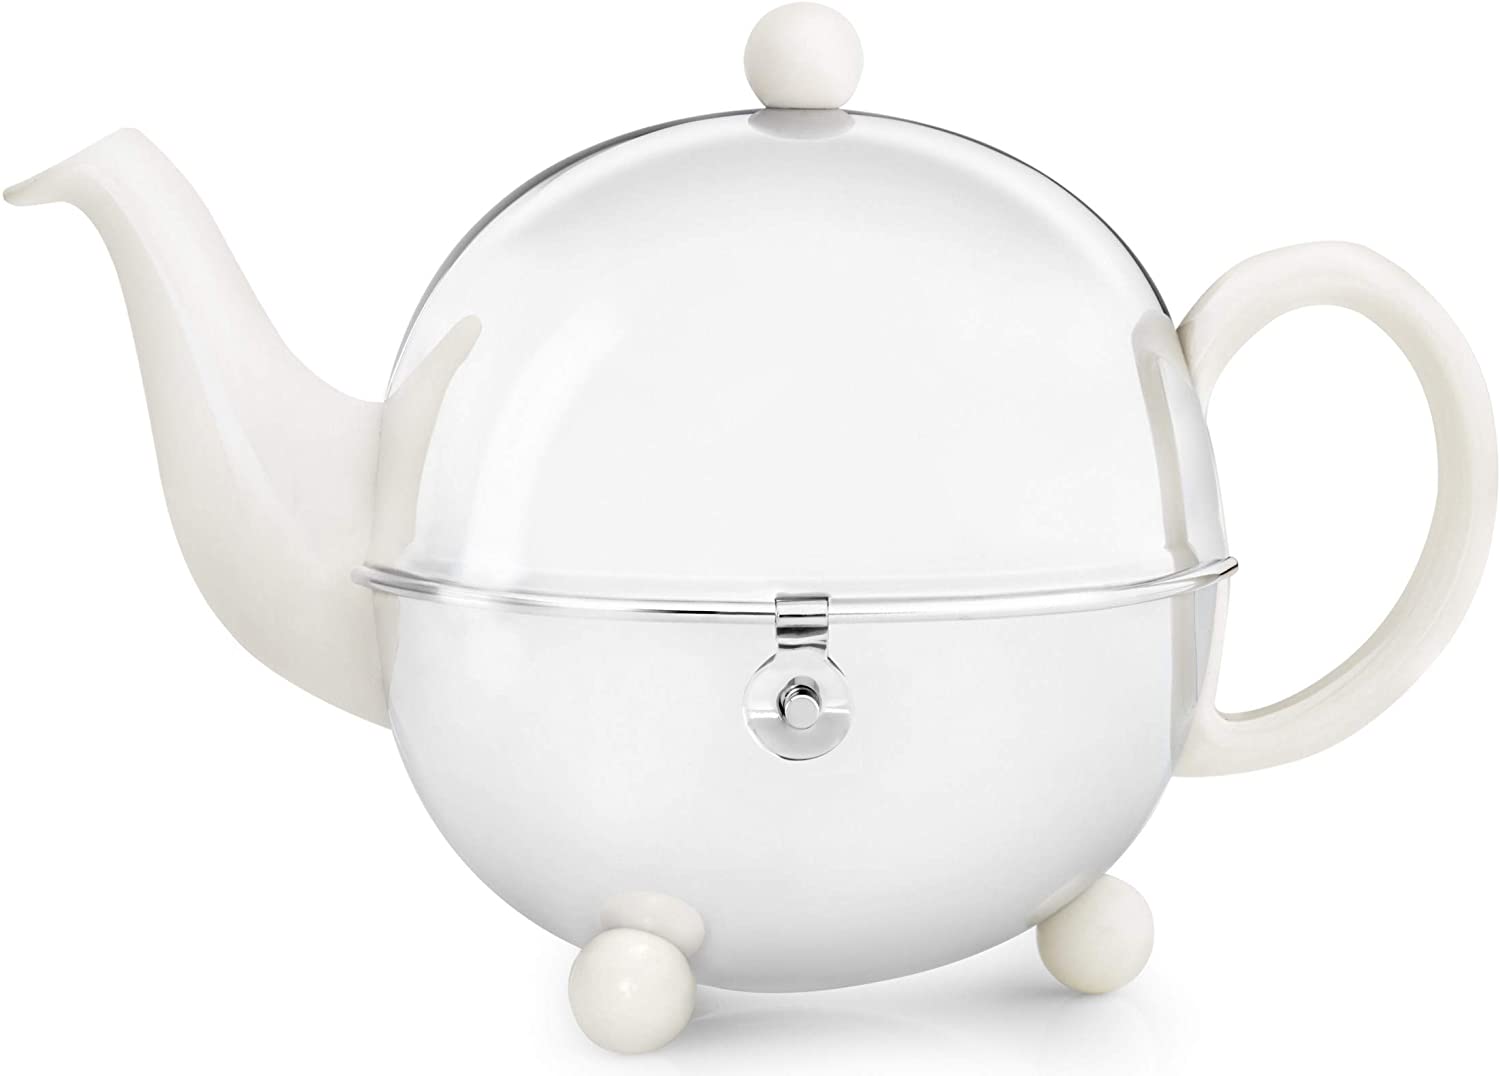 Bredemeijer 1.3 L Ceramics/ Stainless Steel Teapot Cosy, White